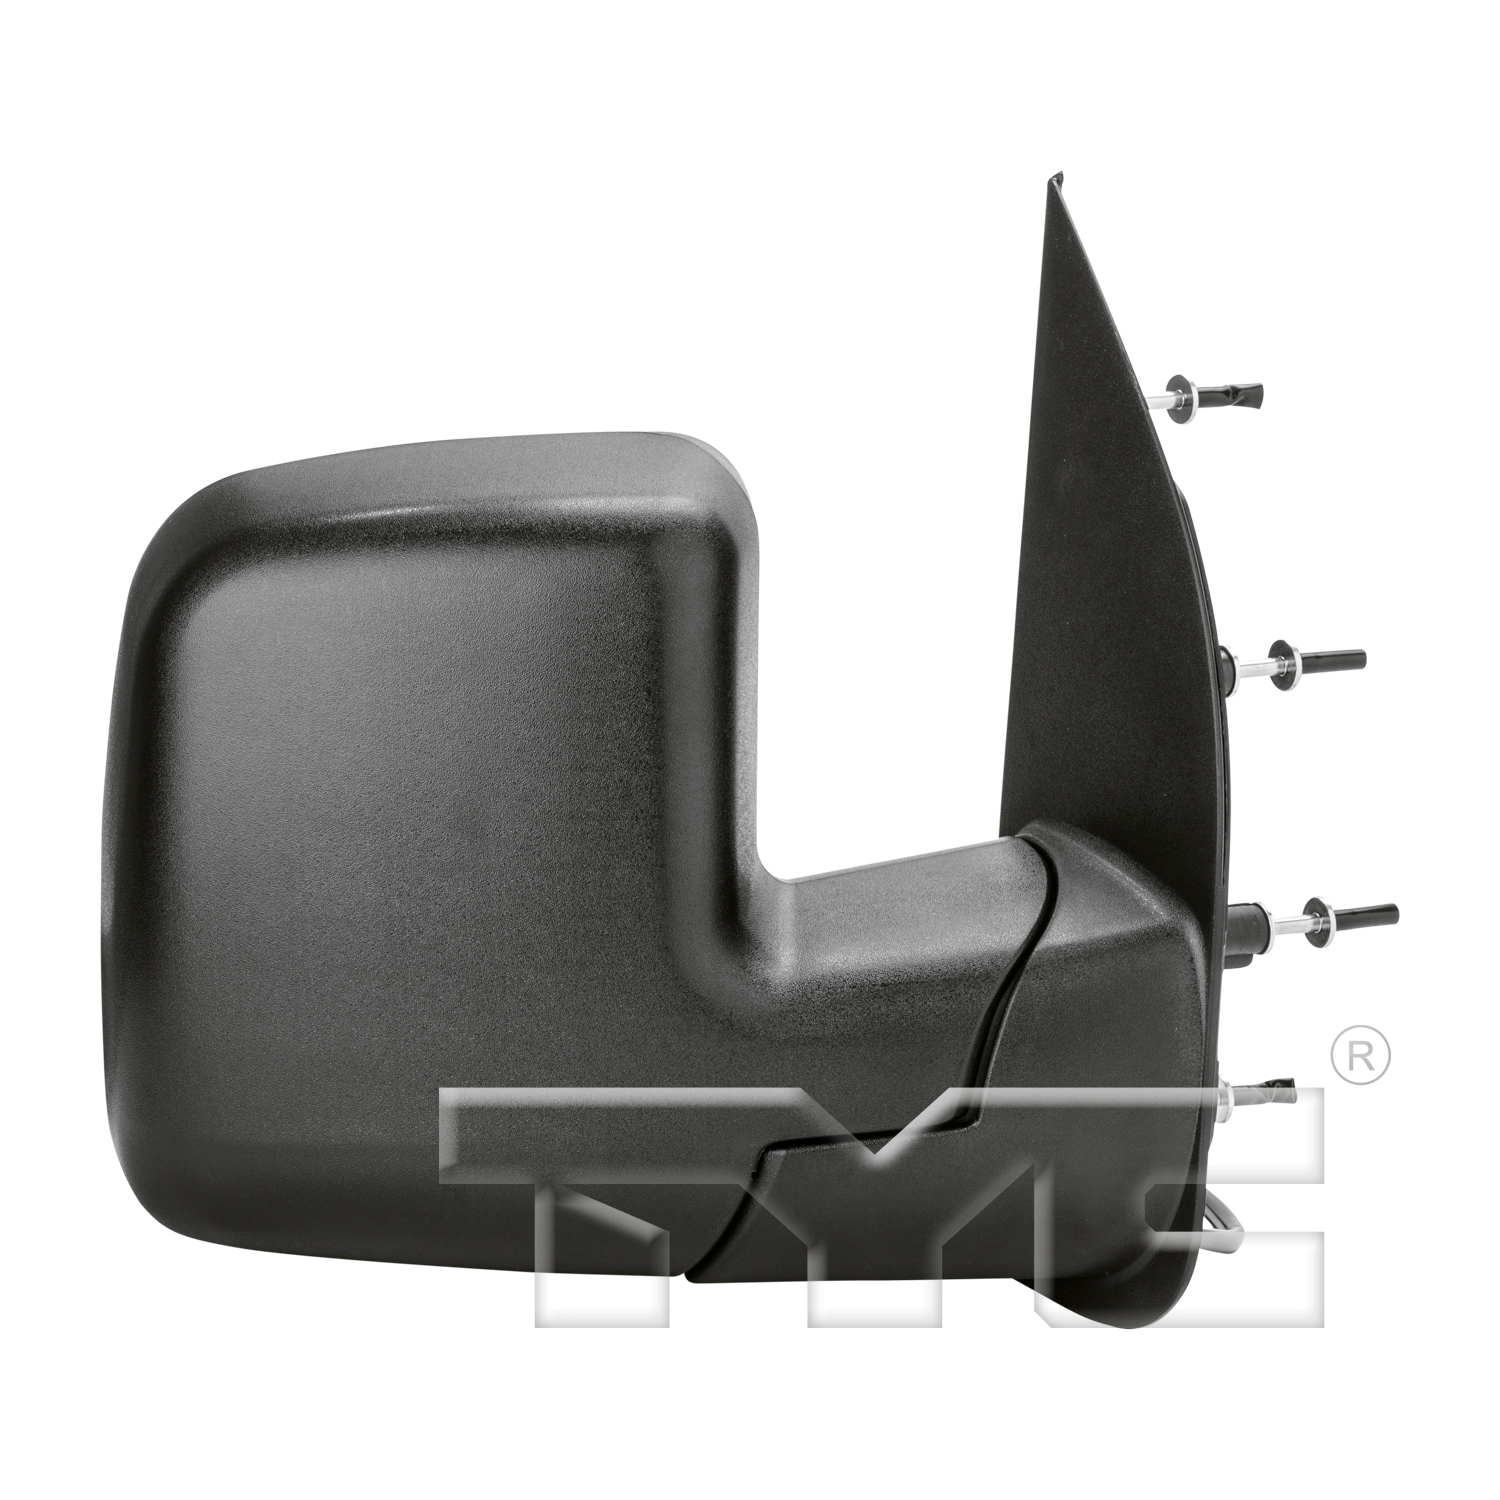 Aftermarket MIRRORS for FORD - E-350 CLUB WAGON, E-350 CLUB WAGON,03-05,RT Mirror outside rear view